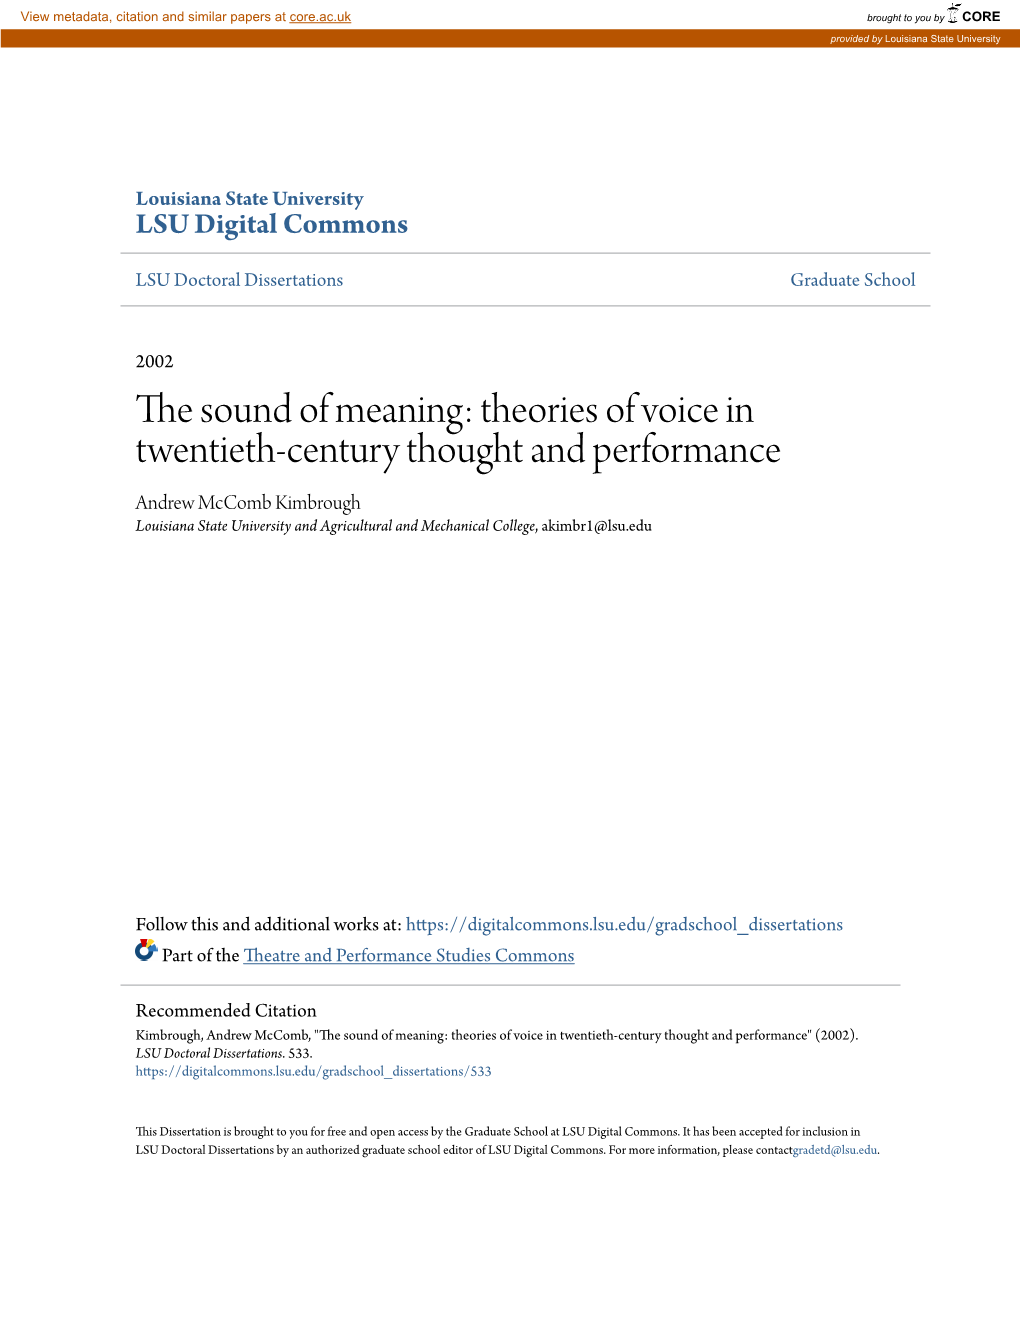 Theories of Voice in Twentieth-Century Thought and Performance